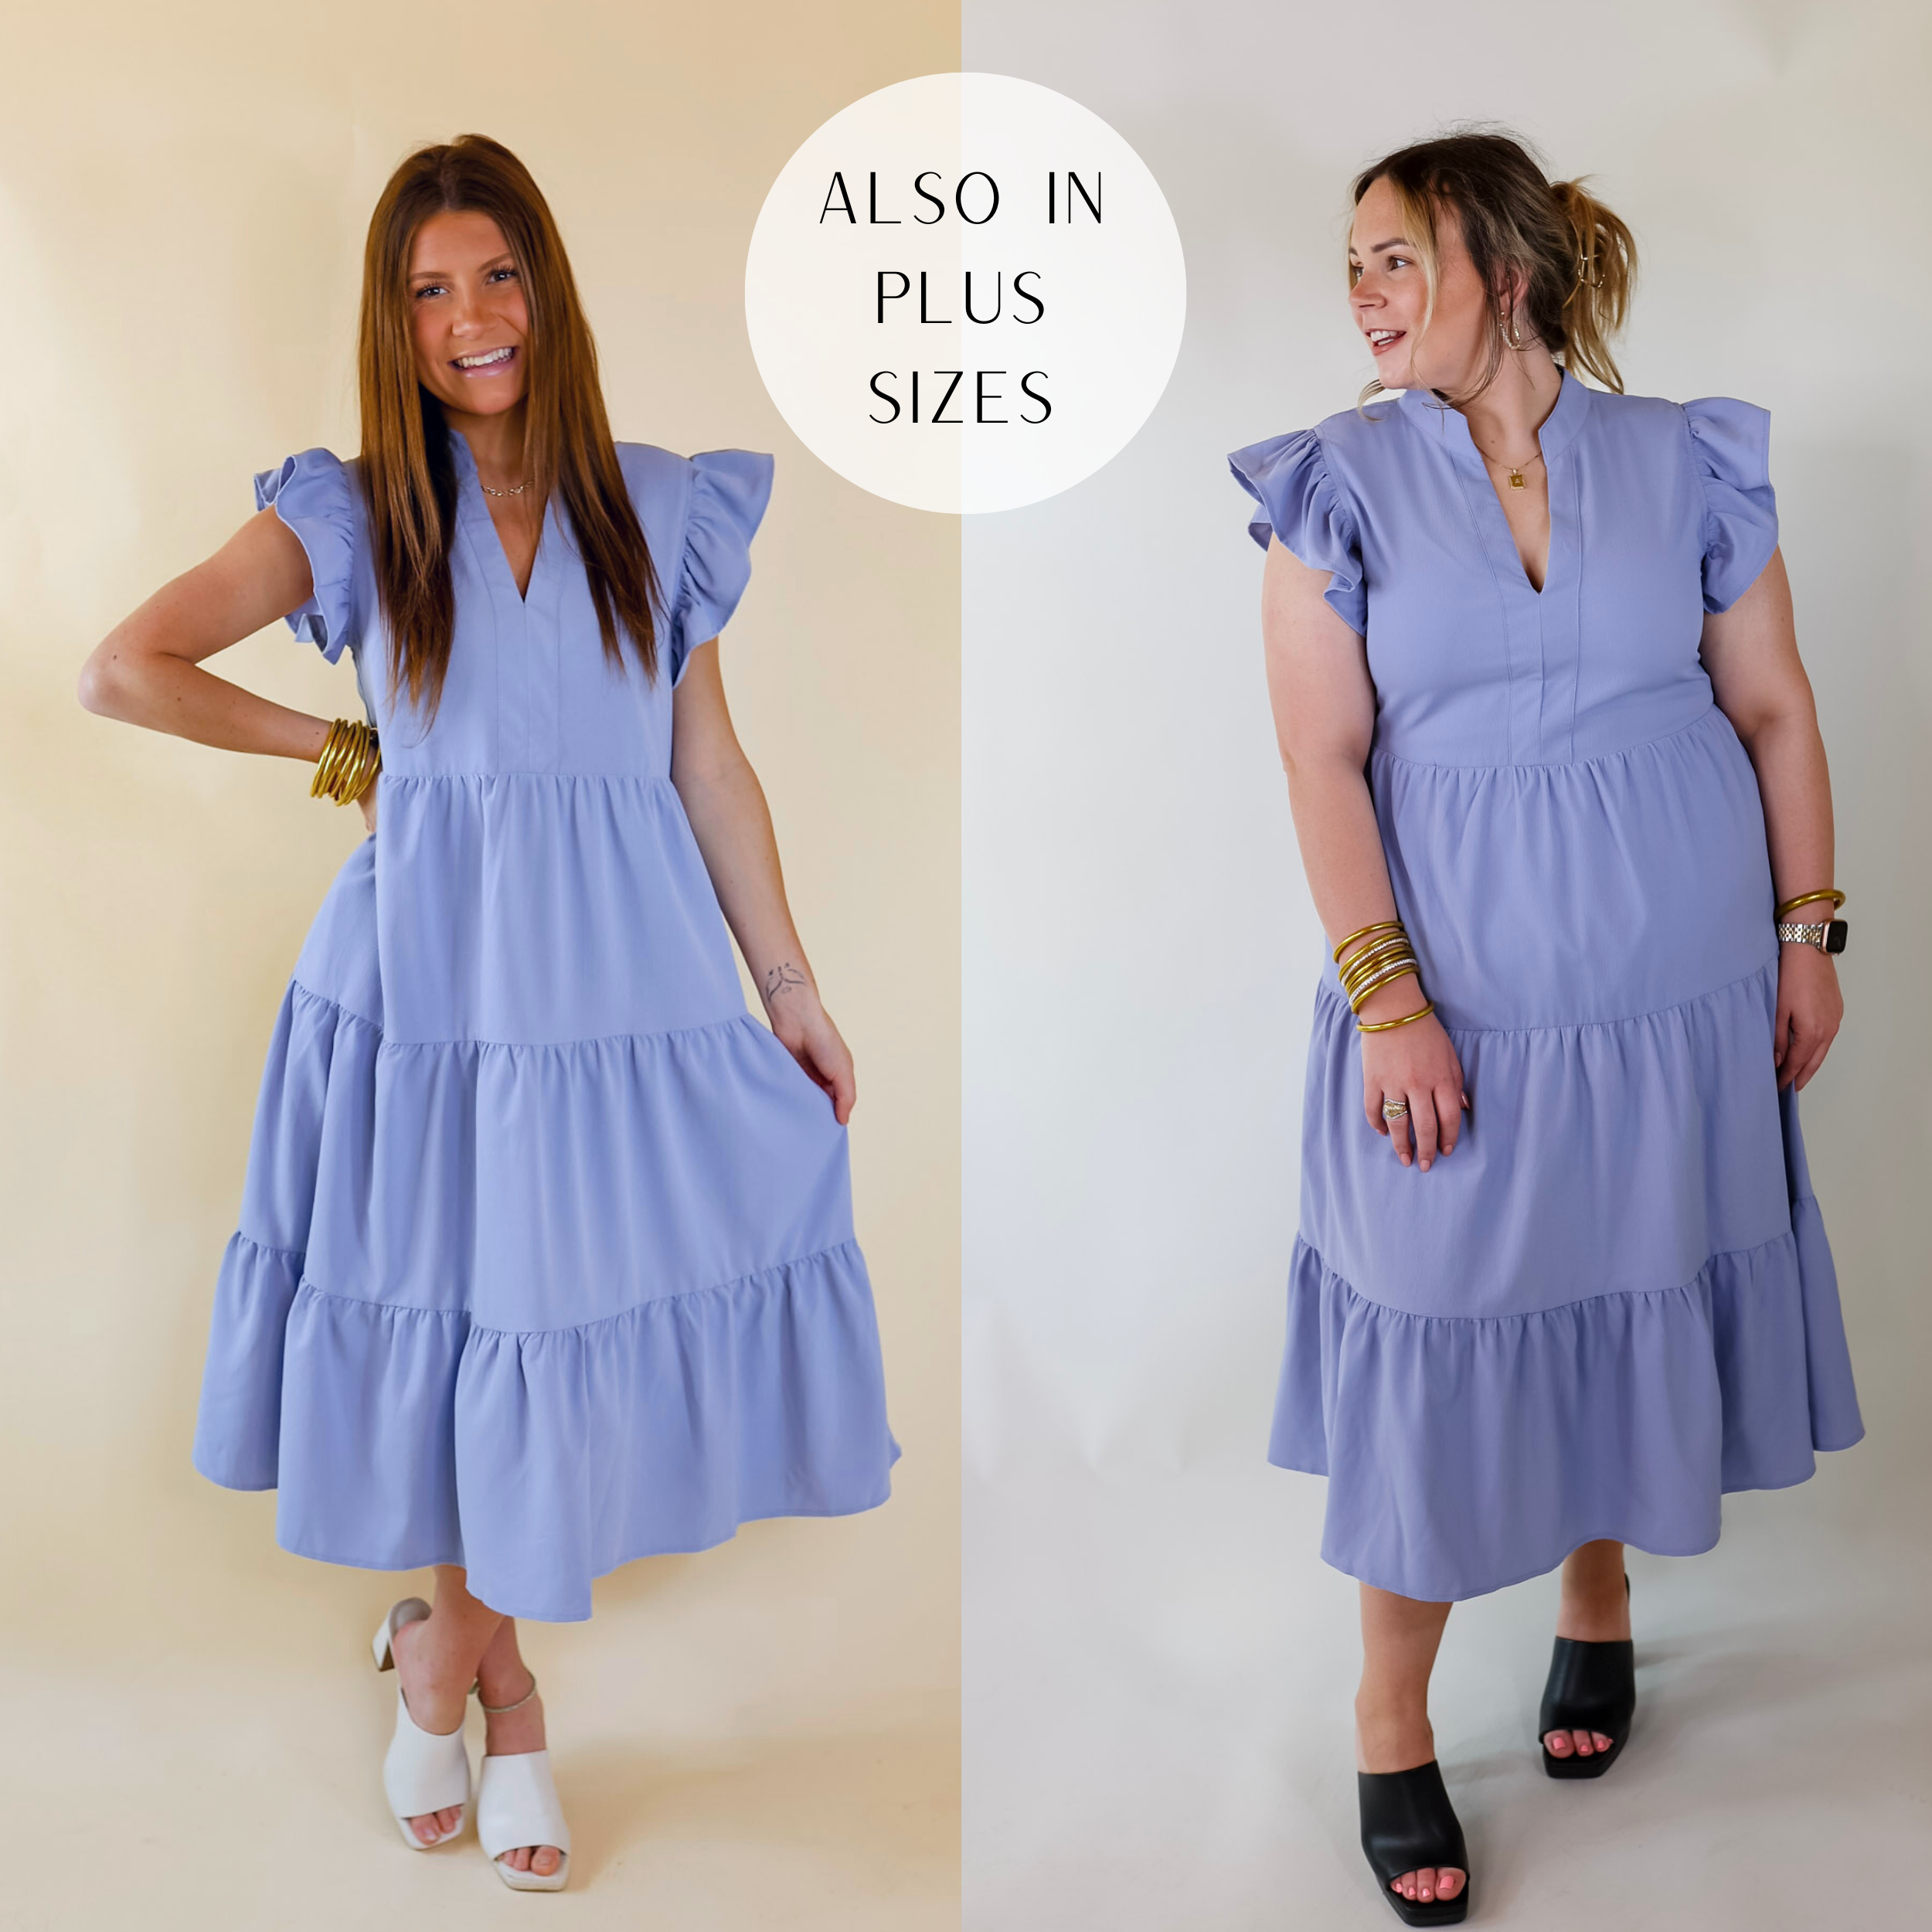 A relaxed fit midi dress in periwinkle. The dress has a V neckline, pockets, tiered skirt, and short flowy ruffled sleeves. Item is pictured on a pale pink background